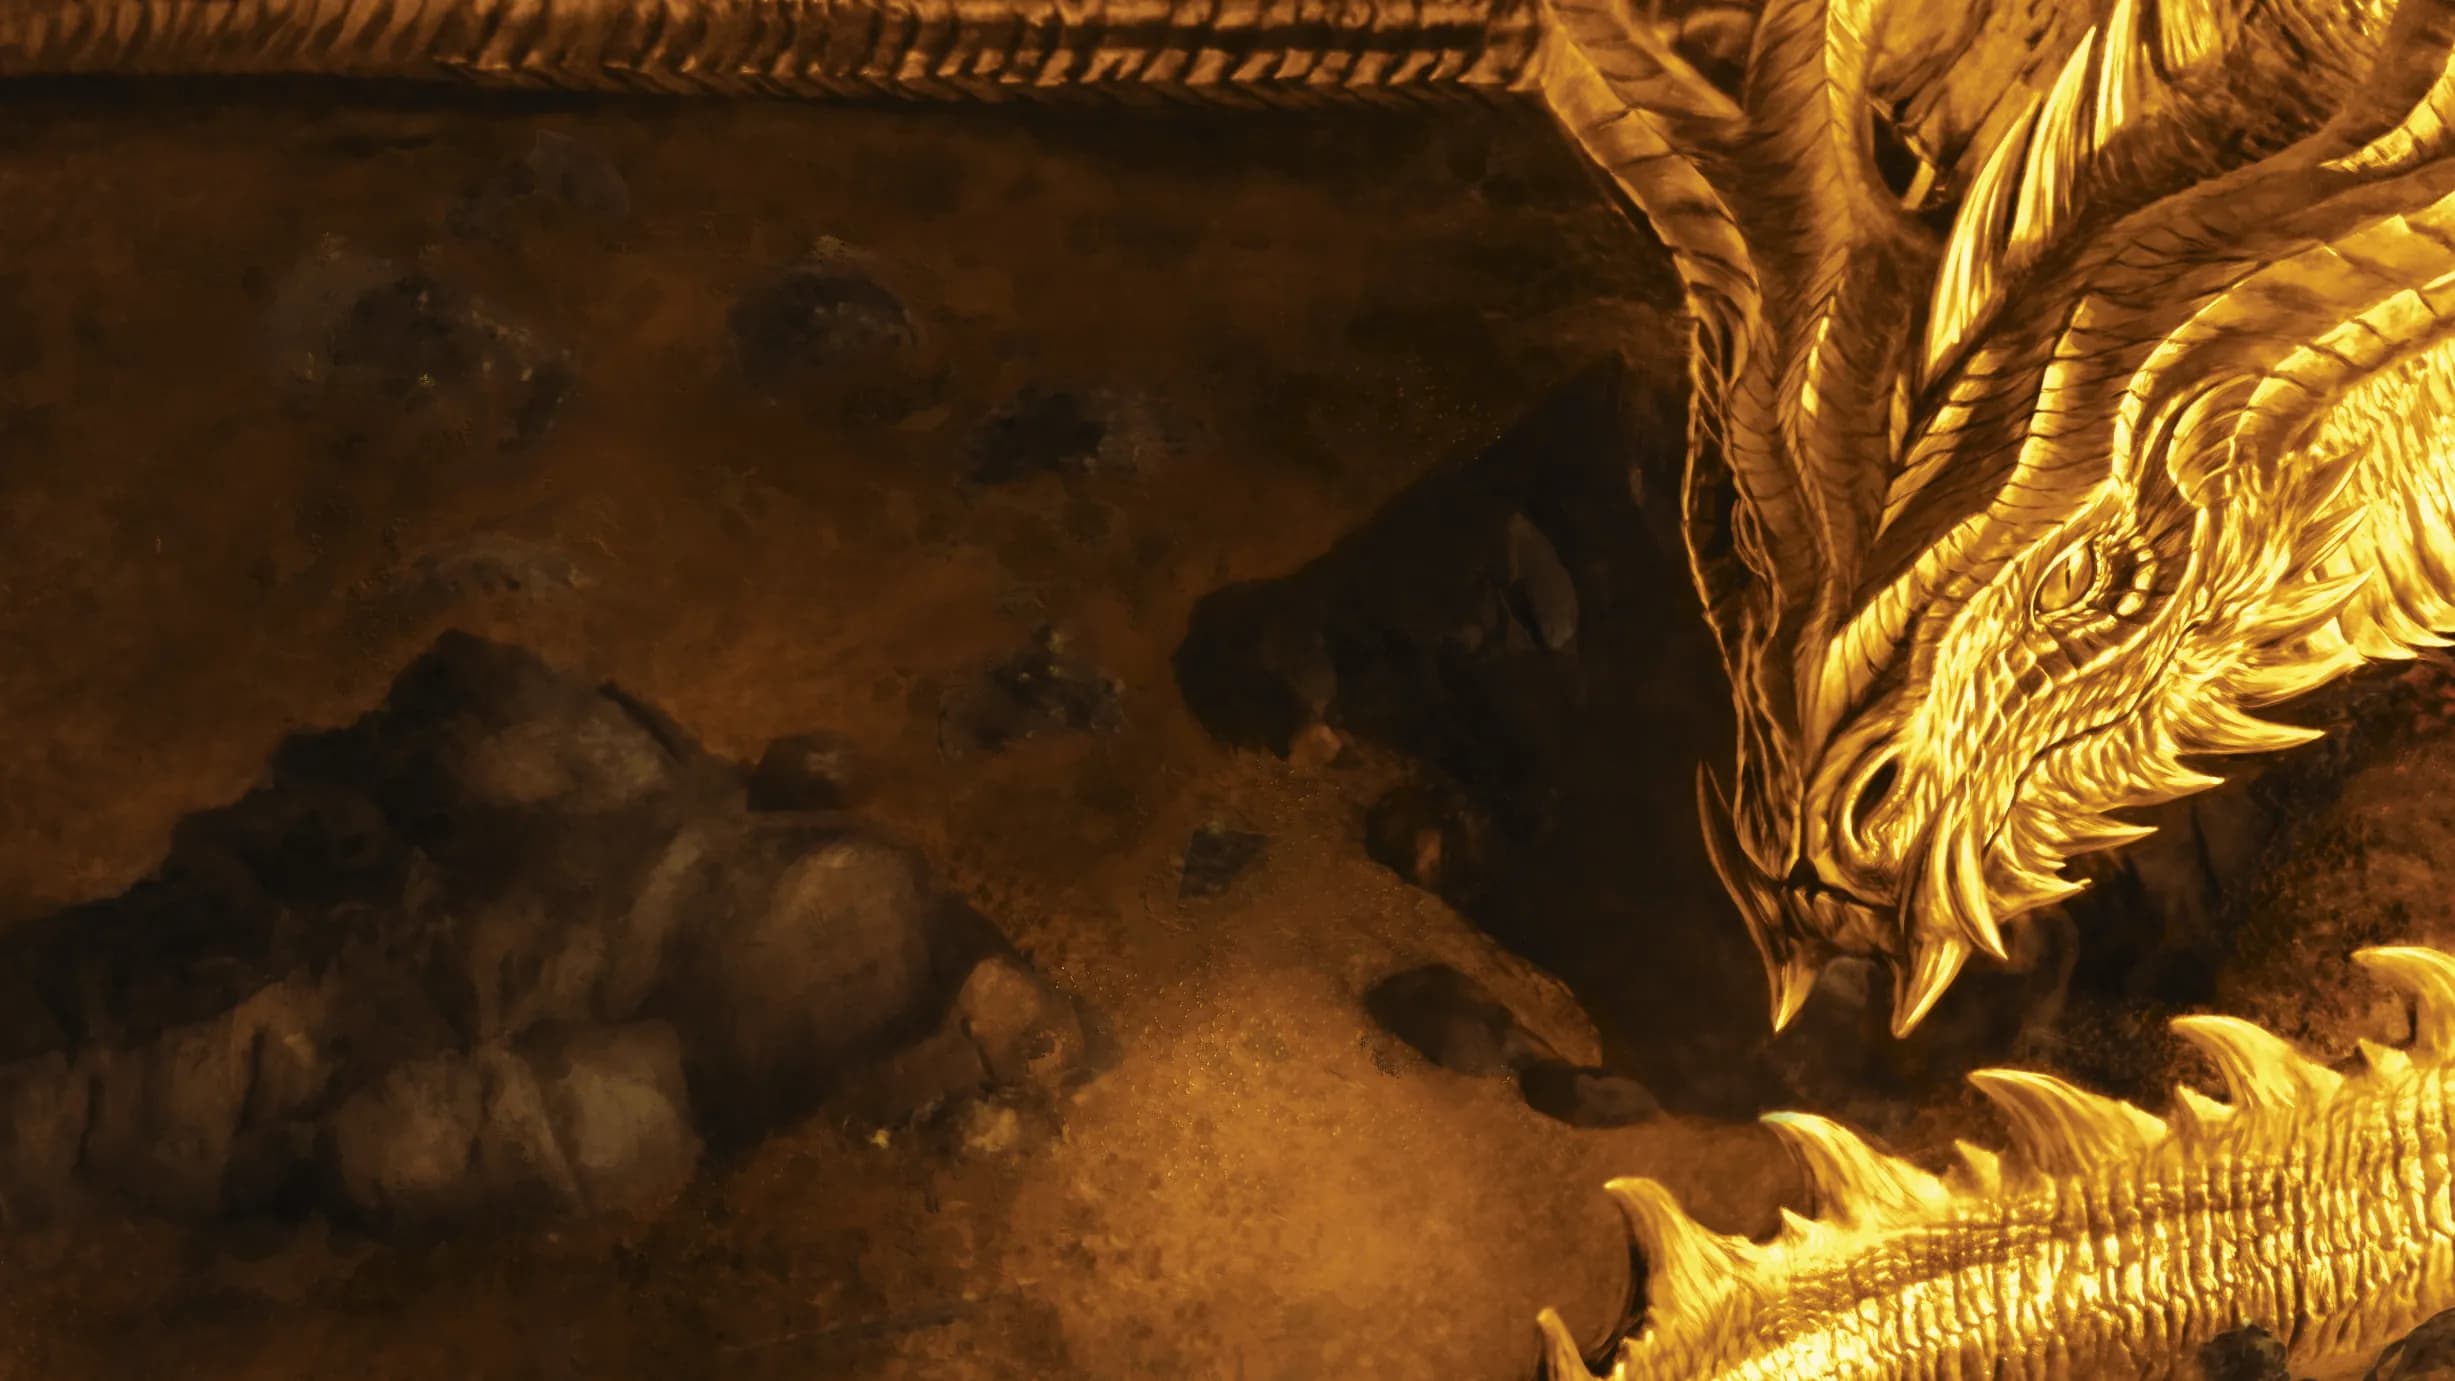 Header background image. A golden dragon from the Invoke Kyloria Flesh and Blood card